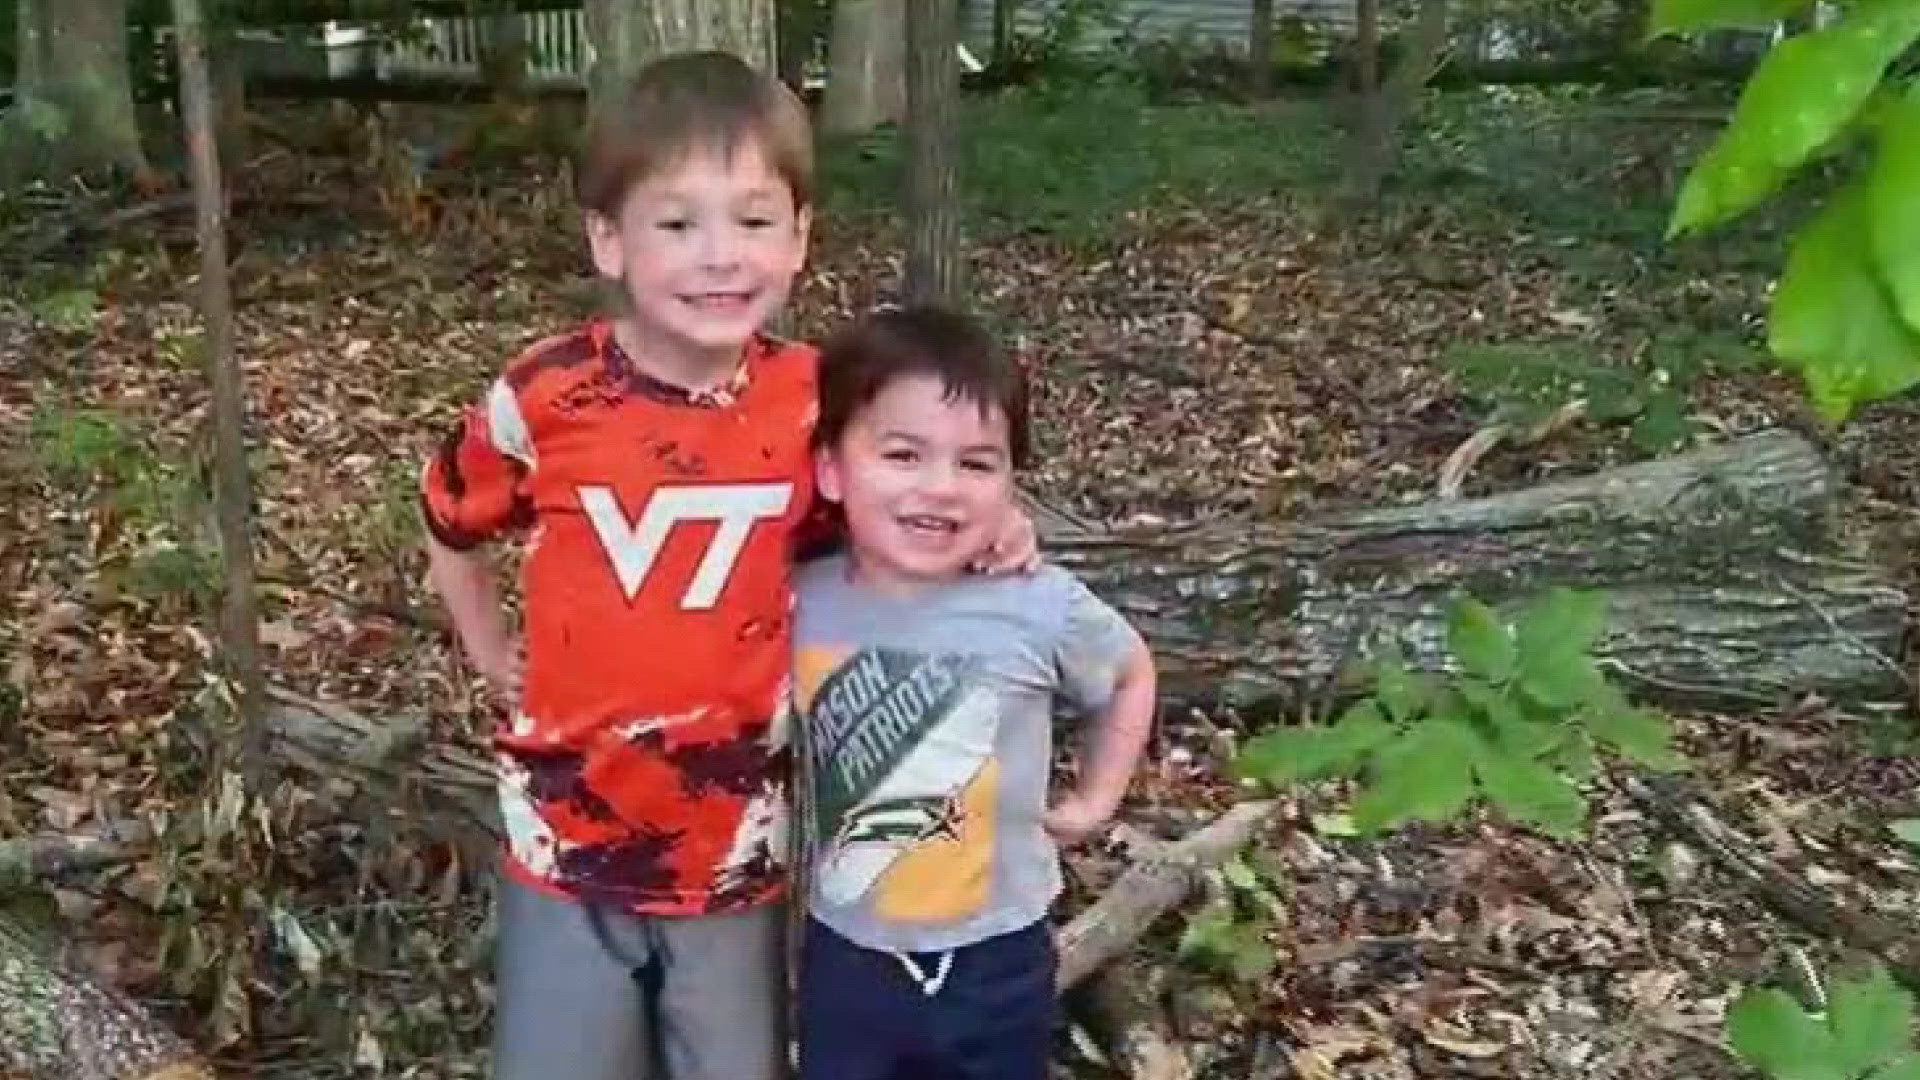 WUSA 9 first told you about William and Zachariah when they were seriously injured in a house fire in Clifton earlier this month.